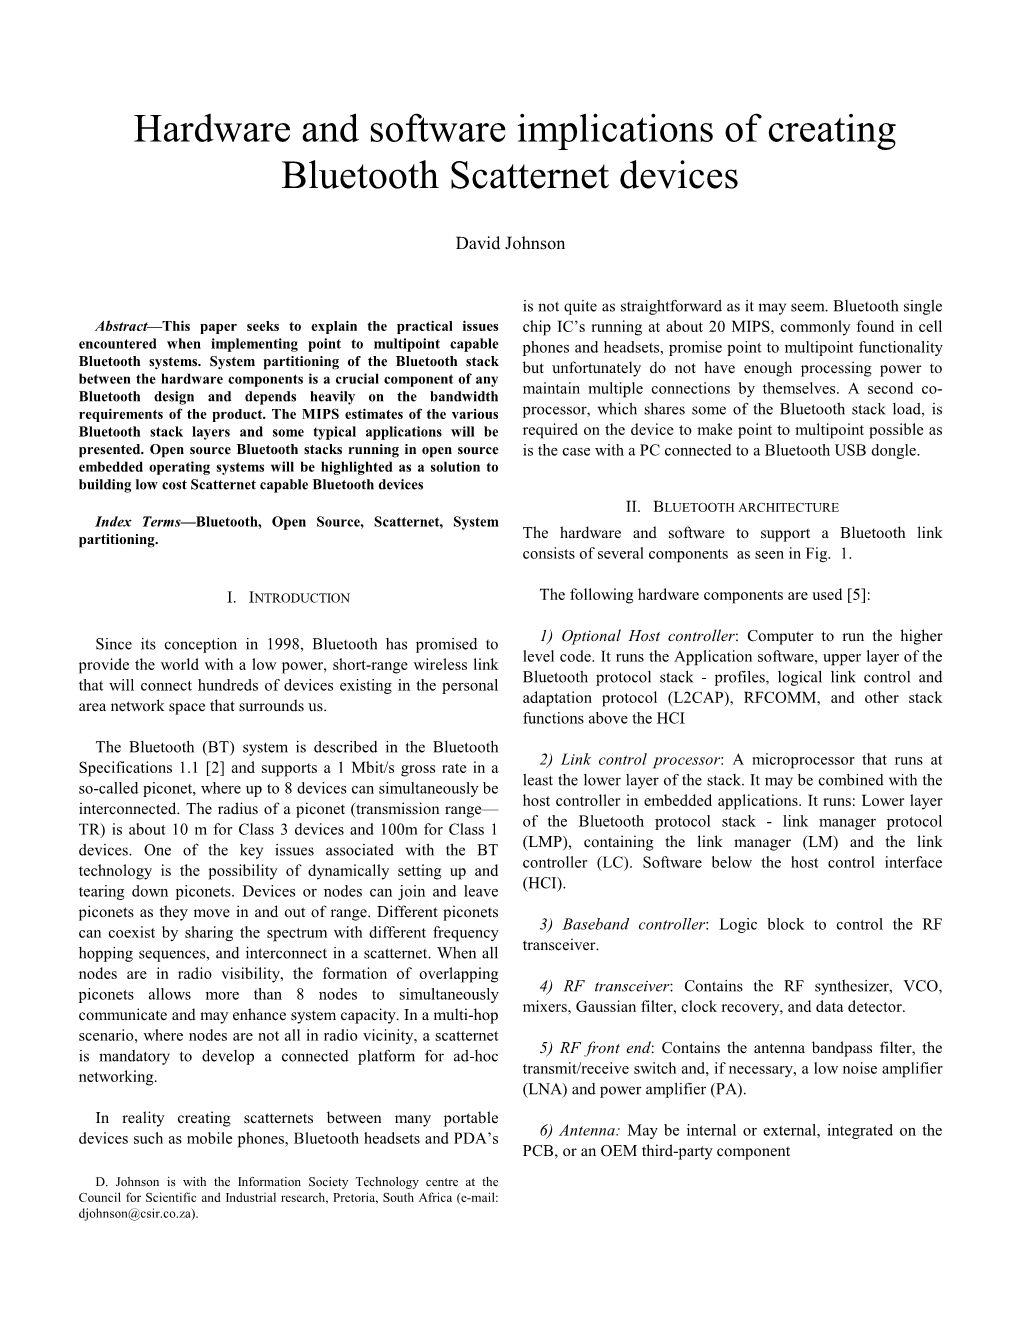 Hardware and Software Implications of Creating Bluetooth Scatternet Devices